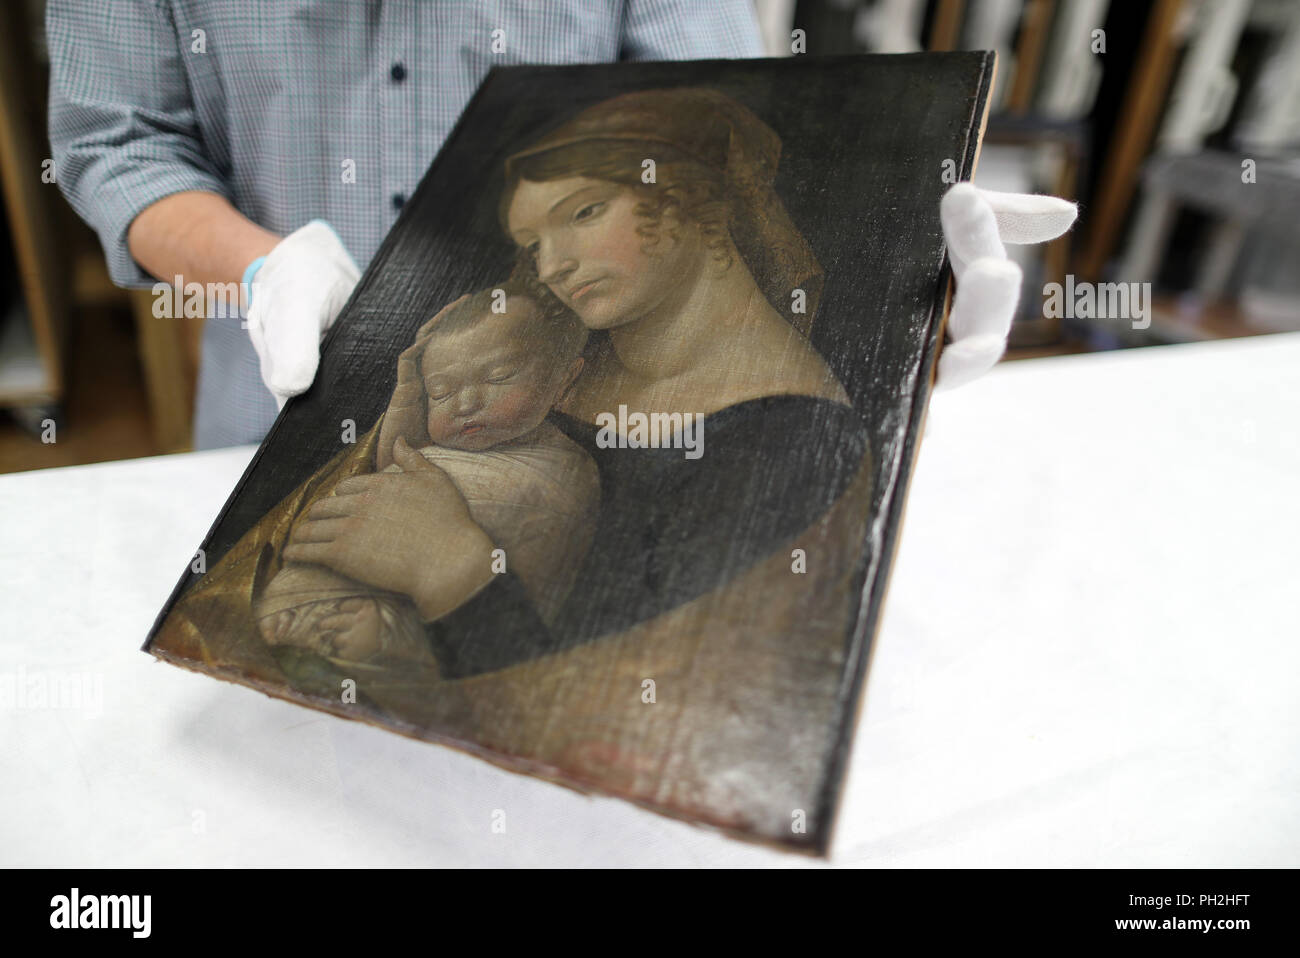 30.08.2018, Berlin: Andrea Mantegna's painting 'Maria mit schlafendem Kind' (1455) is prepared for transport to London in the depot of the National Museums in Berlin. An exhibition shown in Berlin and London is dedicated to the work of the two Renaissance artists Giovanni Bellini (c. 1435-1516) and Andrea Mantegna (c. 1431-1506). For the show, the National Museums in Berlin and the National Gallery in London are cooperating with the British Museum. Photo: Jens Büttner/dpa-Zentralbild/dpa Stock Photo